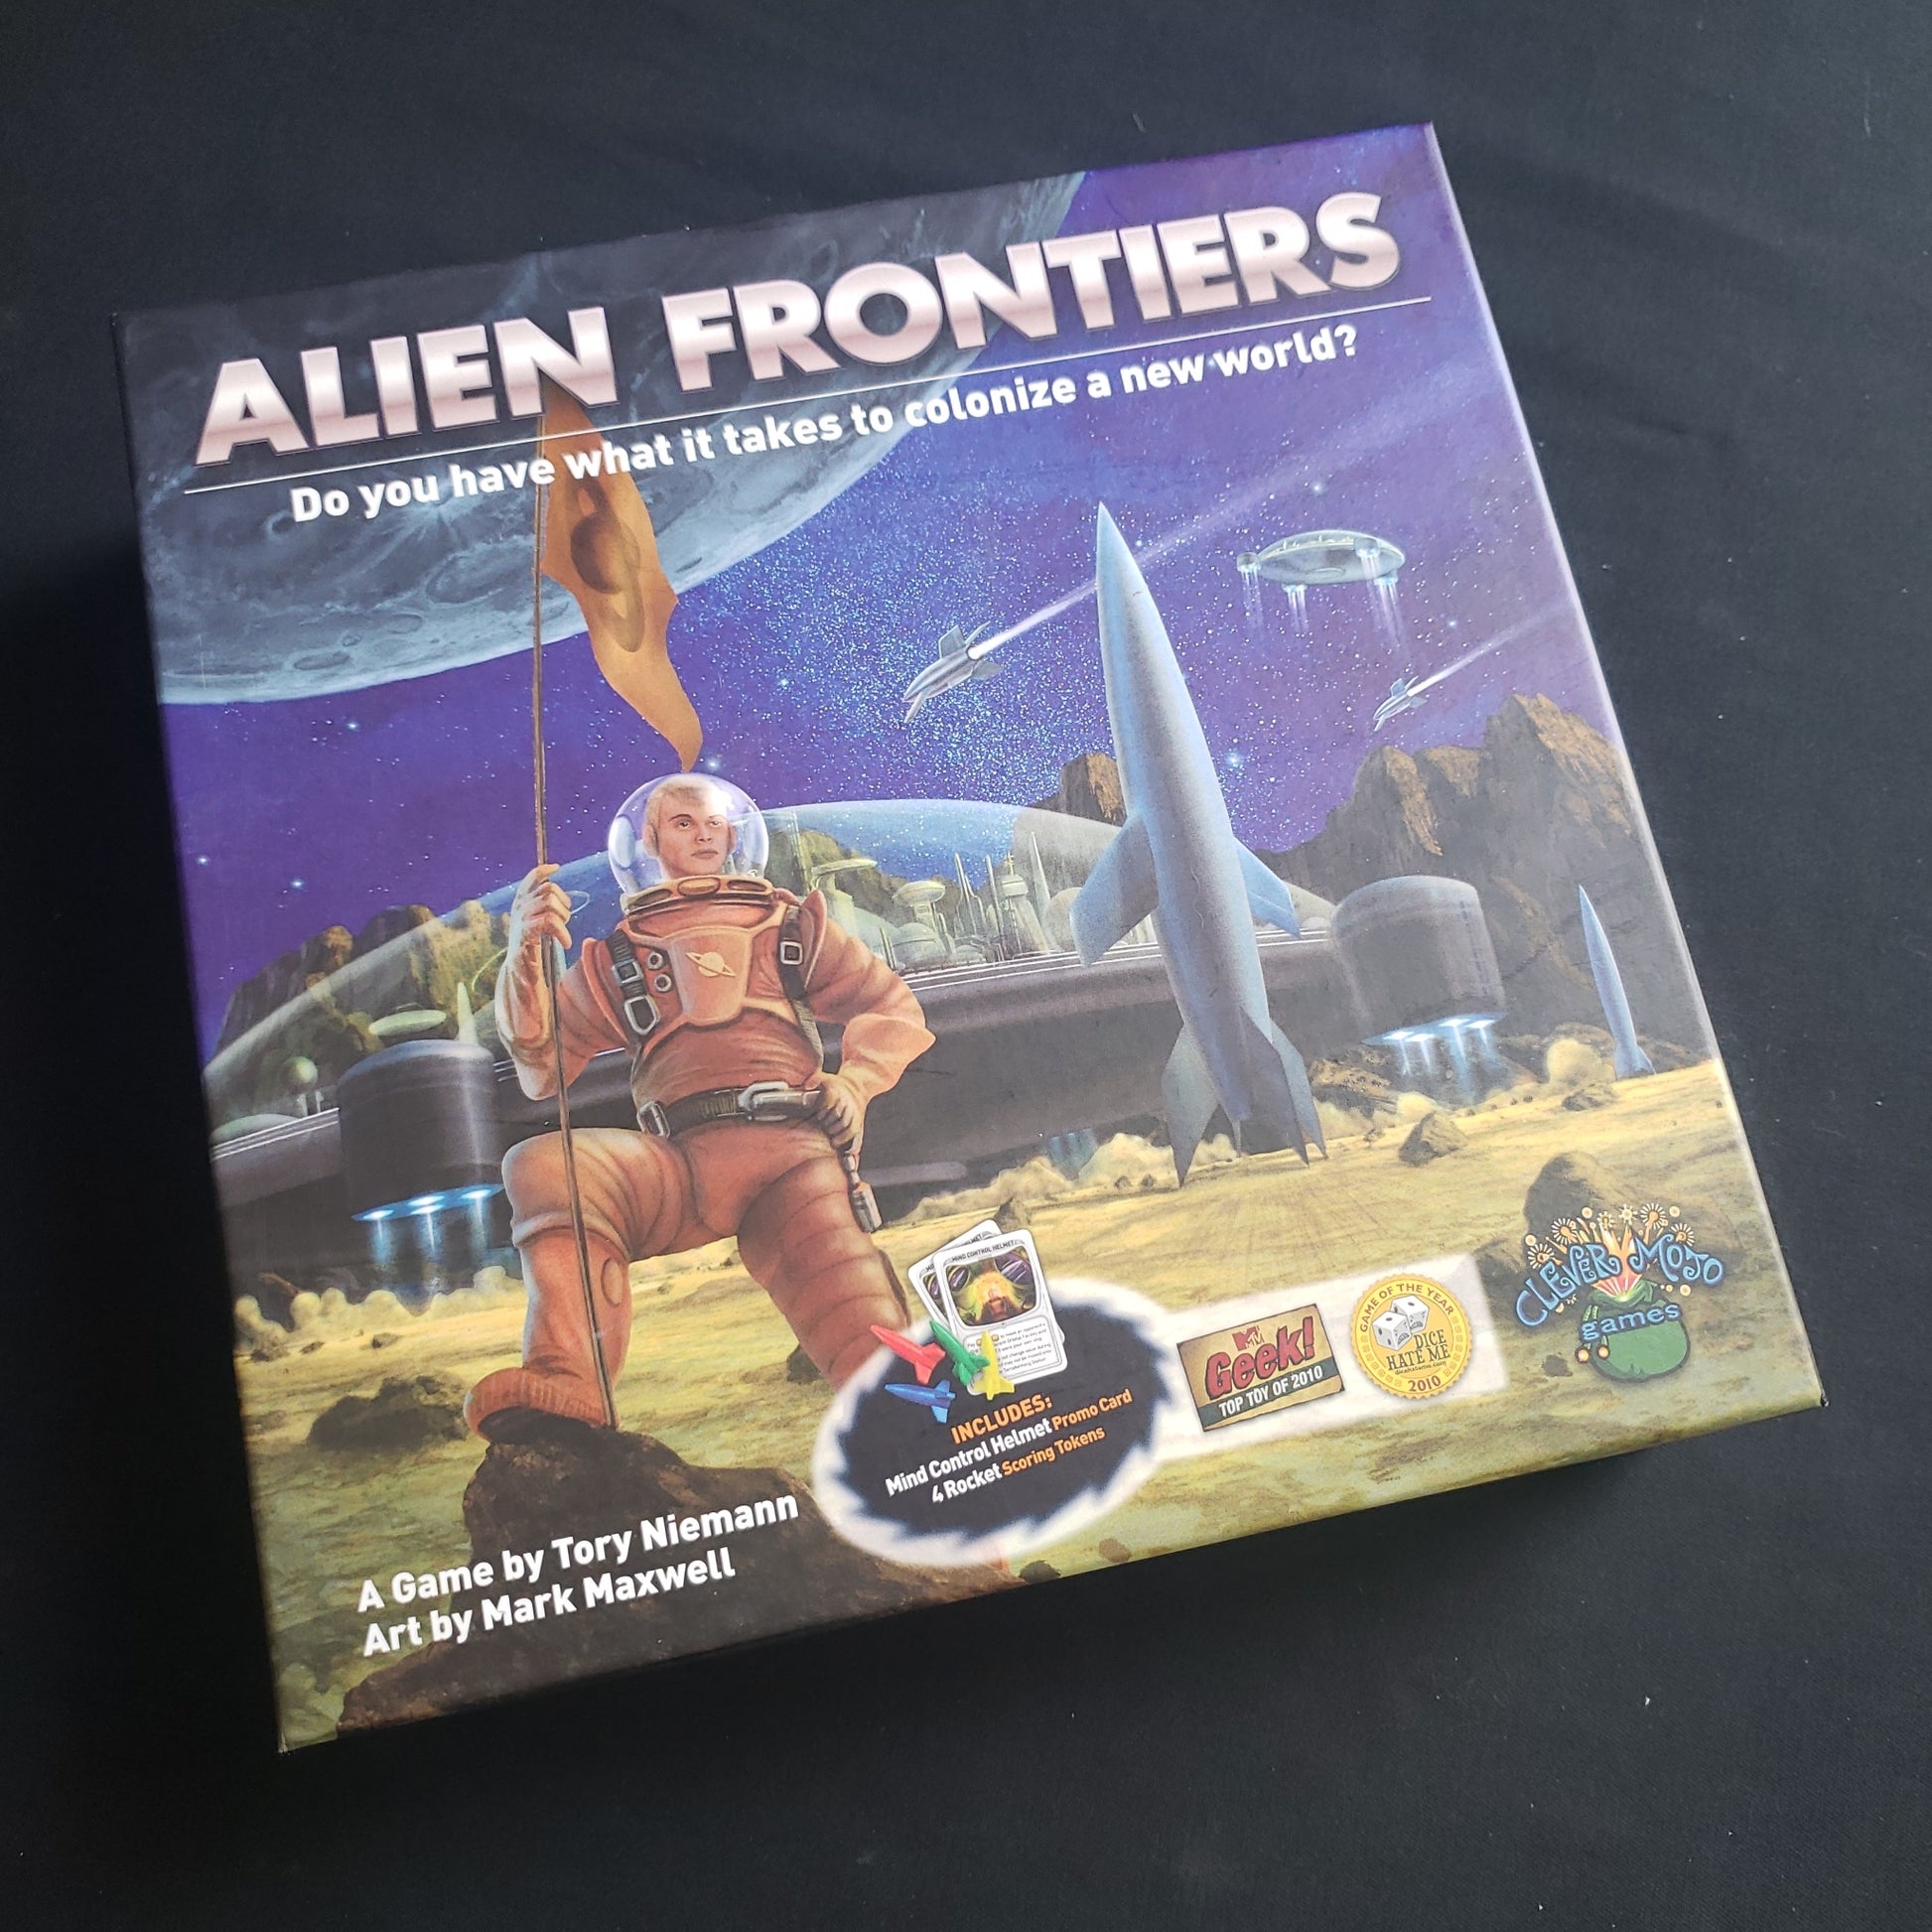 Image shows the front cover of the box of the Alien Frontiers board game